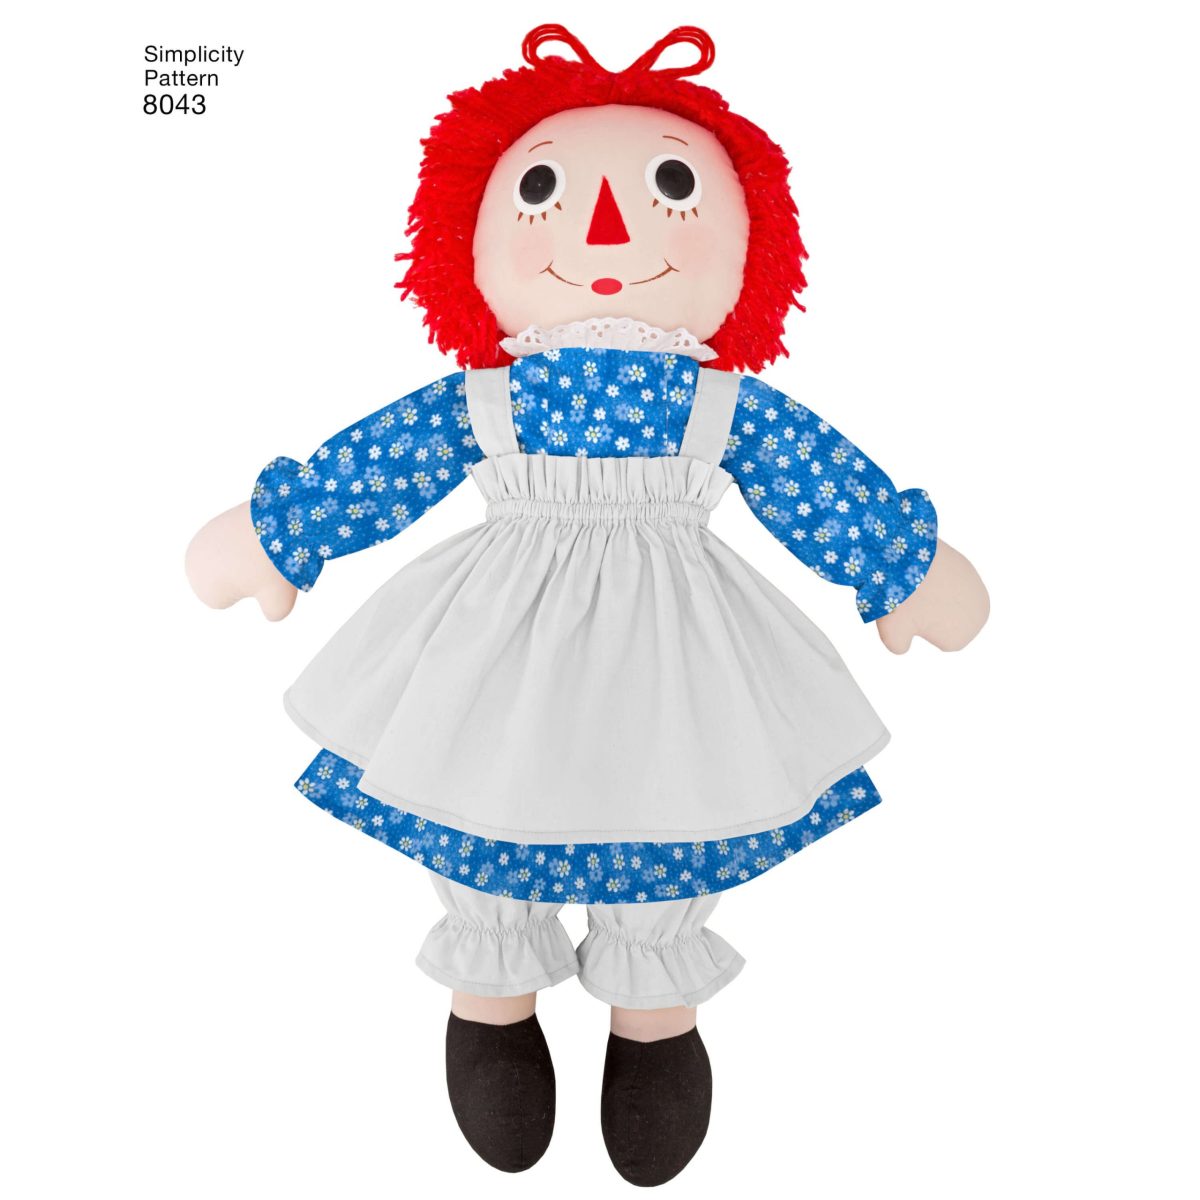 Simplicity Sewing Pattern 8043 Raggedy Ann & Andy Dolls